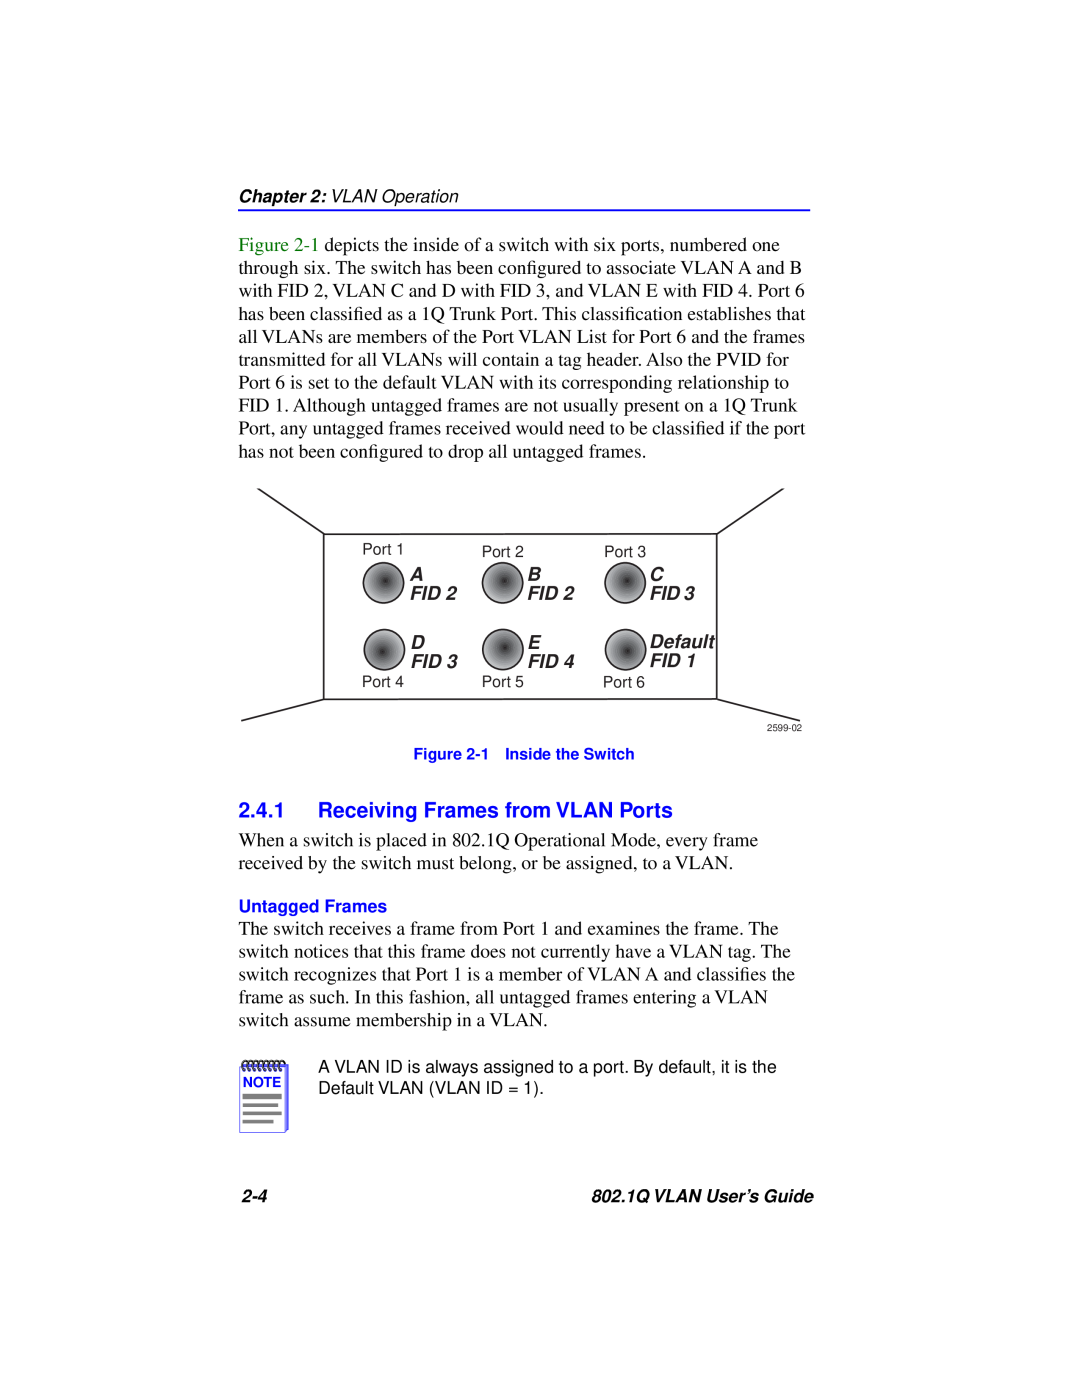 Cabletron Systems 802.1Q manual Receiving Frames from VLAN Ports, Untagged Frames 